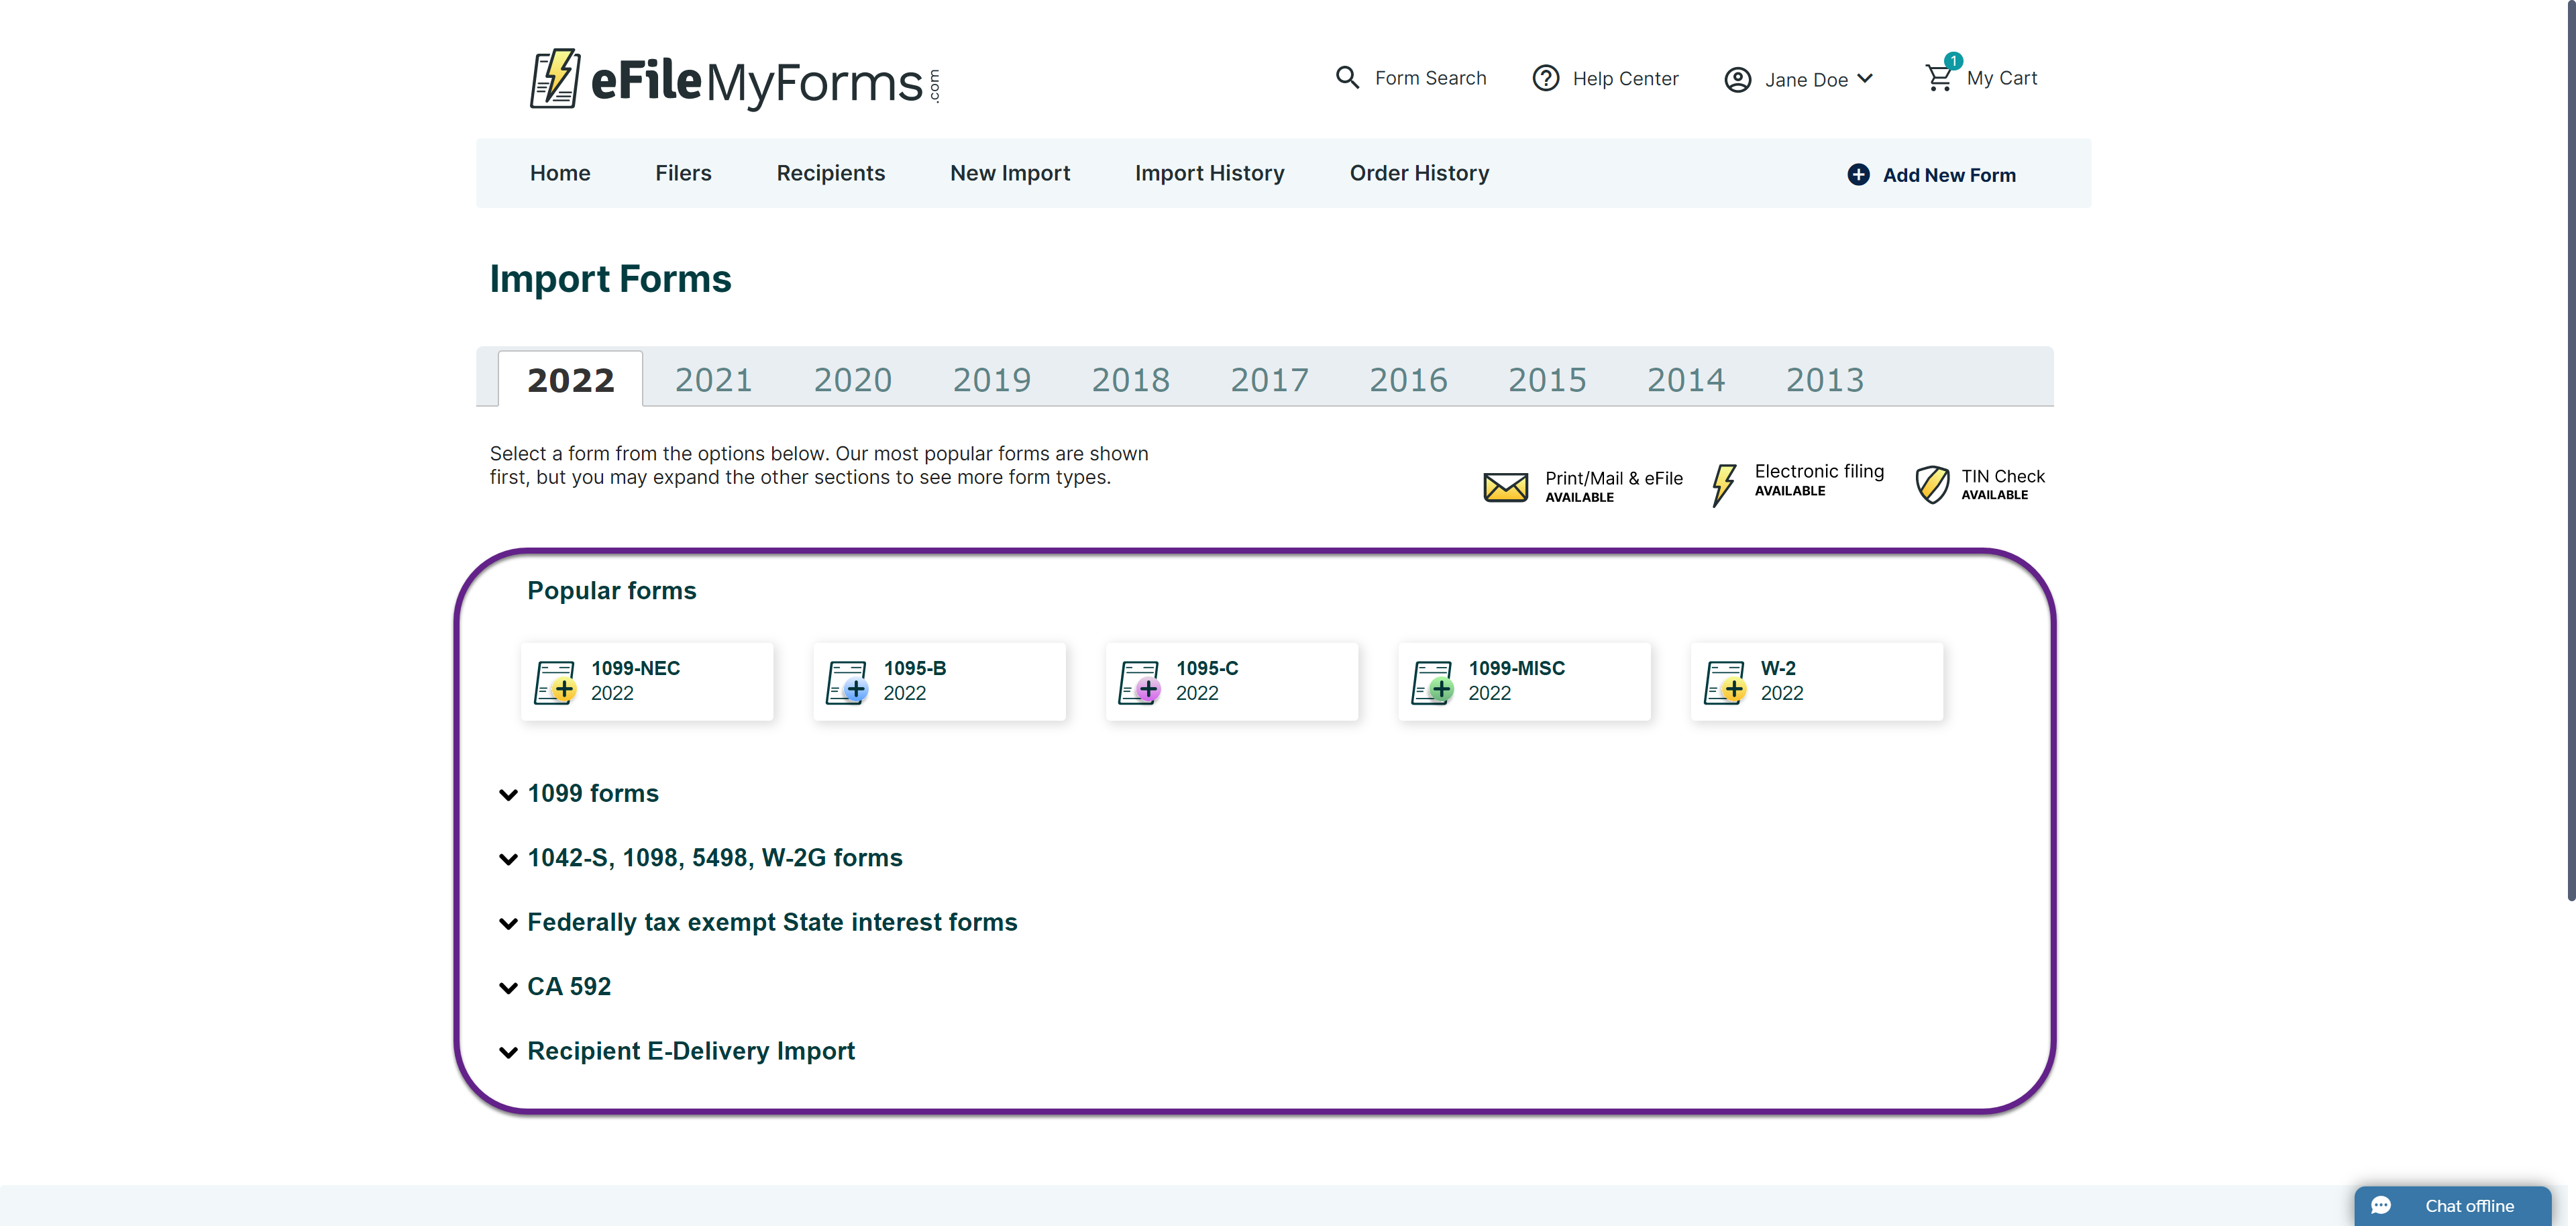 Image of the Import Forms screen with a callout on the form types.